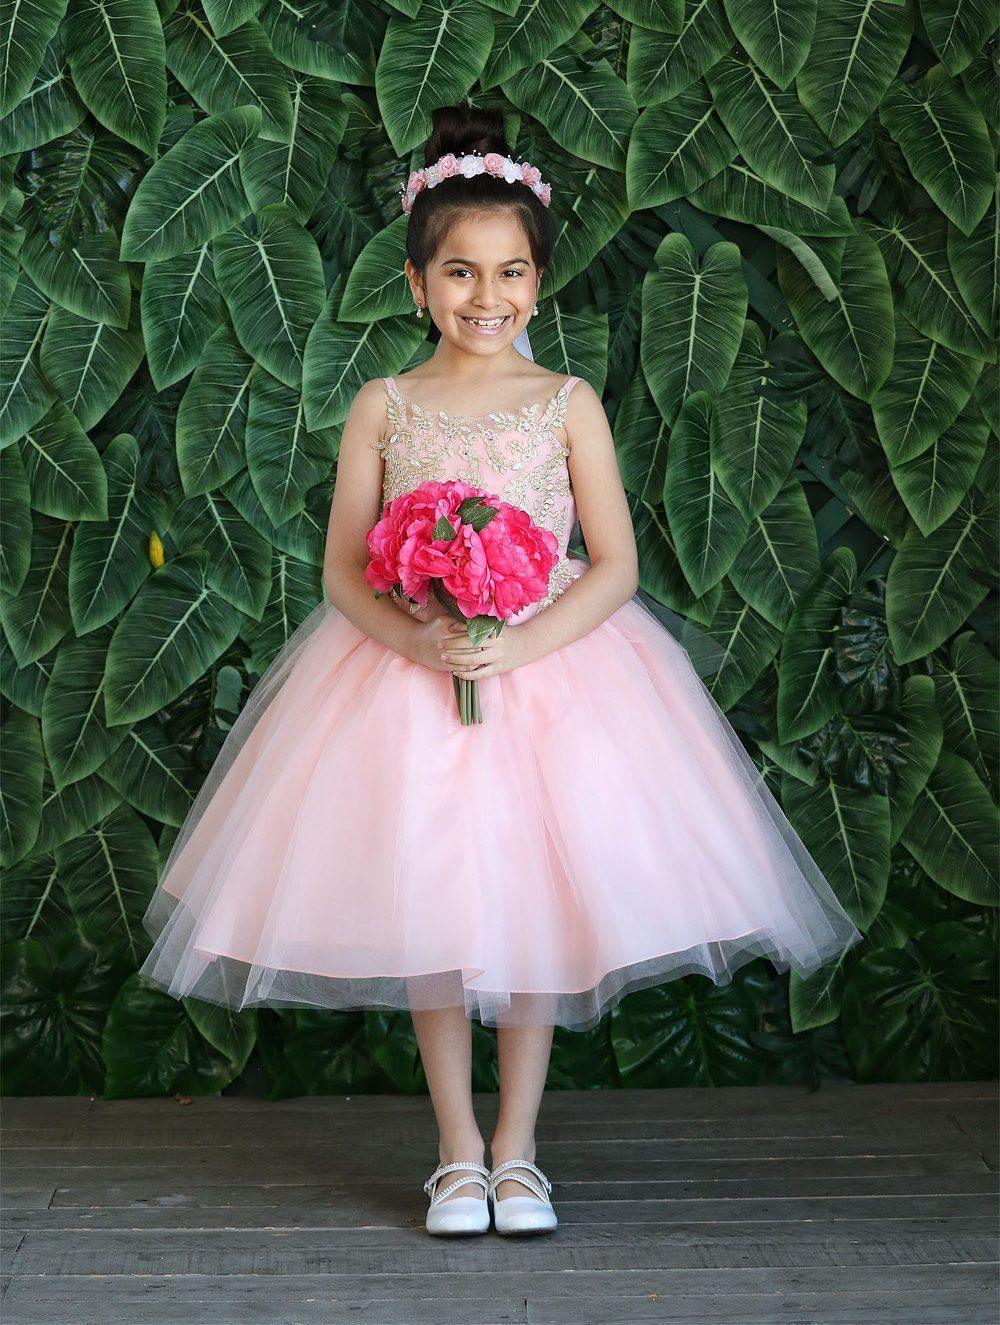 Sleeveless Beaded Lace Appliques Flower Girl Dress - The Dress Outlet